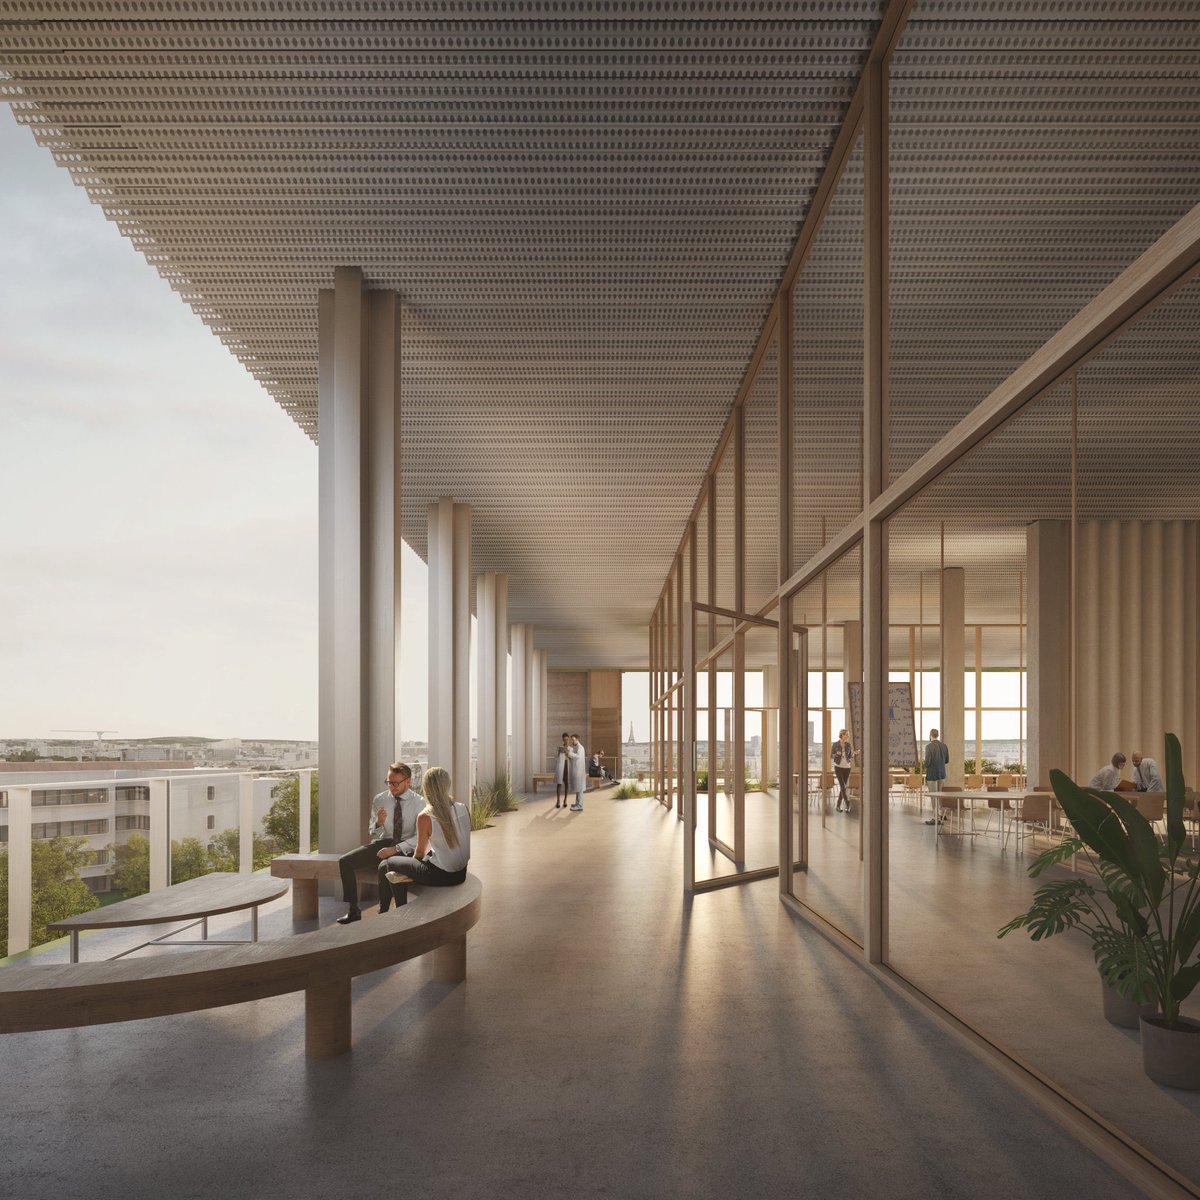 We know how will be the next Research Building @GustaveRoussy (Q1 2027) 32 000 m2 , 60 research teams in 15 Centers, 15 core facilities, 1400 staff. Each floor will include 10 teams of biology that will surround Data Science / Epidemiology teams. We are welcoming new teams !